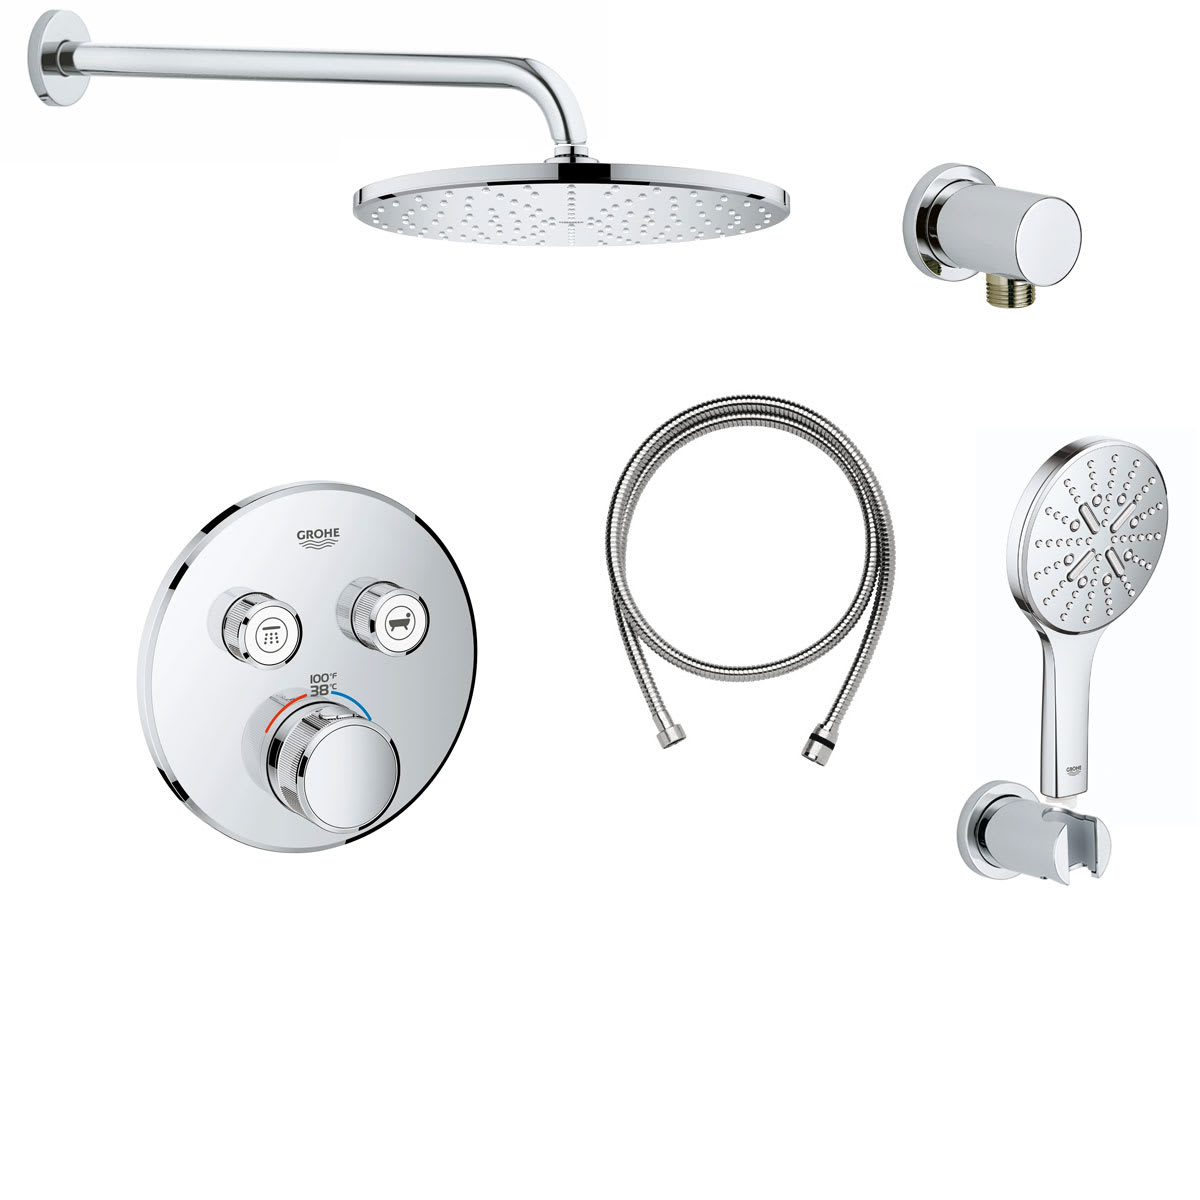 Immoraliteit vermijden Mening Grohe GSS-Grohtherm-CIR-21-000 Grohtherm Thermostatic | Build.com